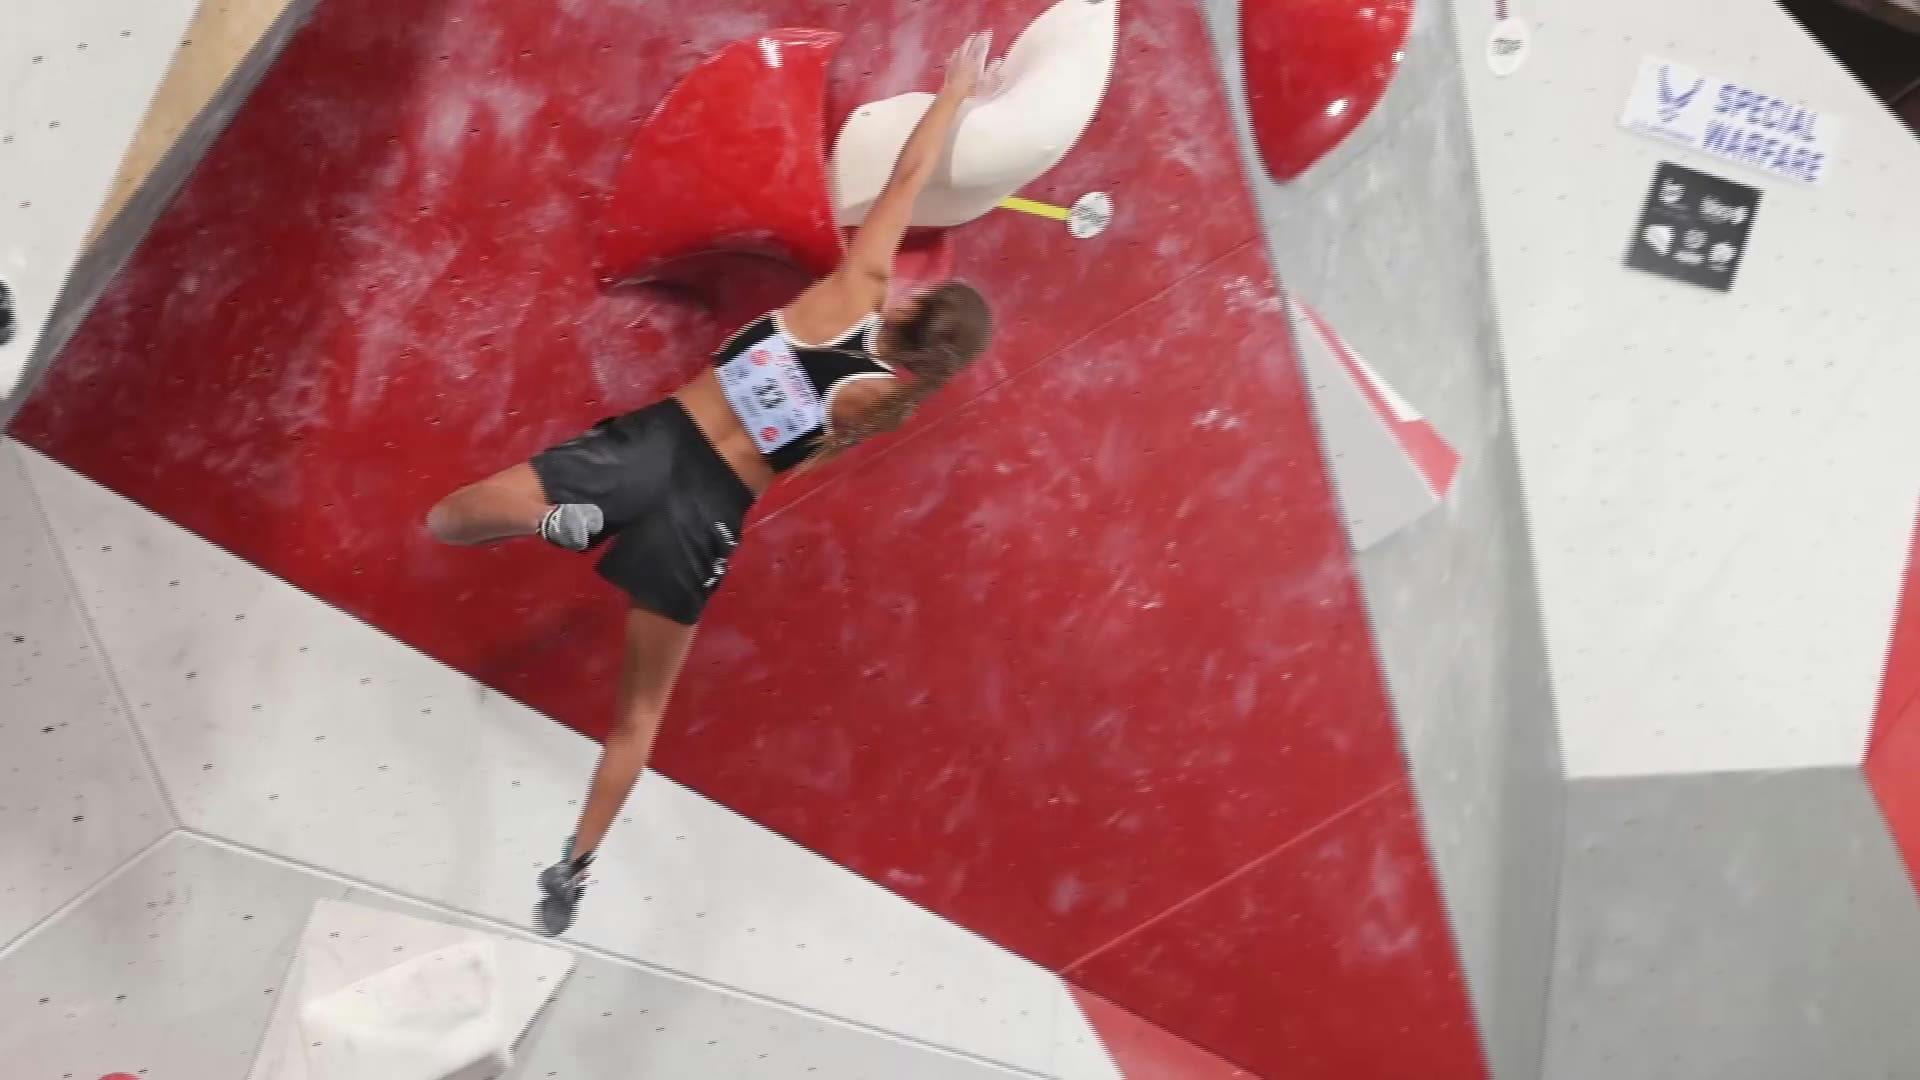 USA Climbing National Team Trials presented by YETI | Trailer